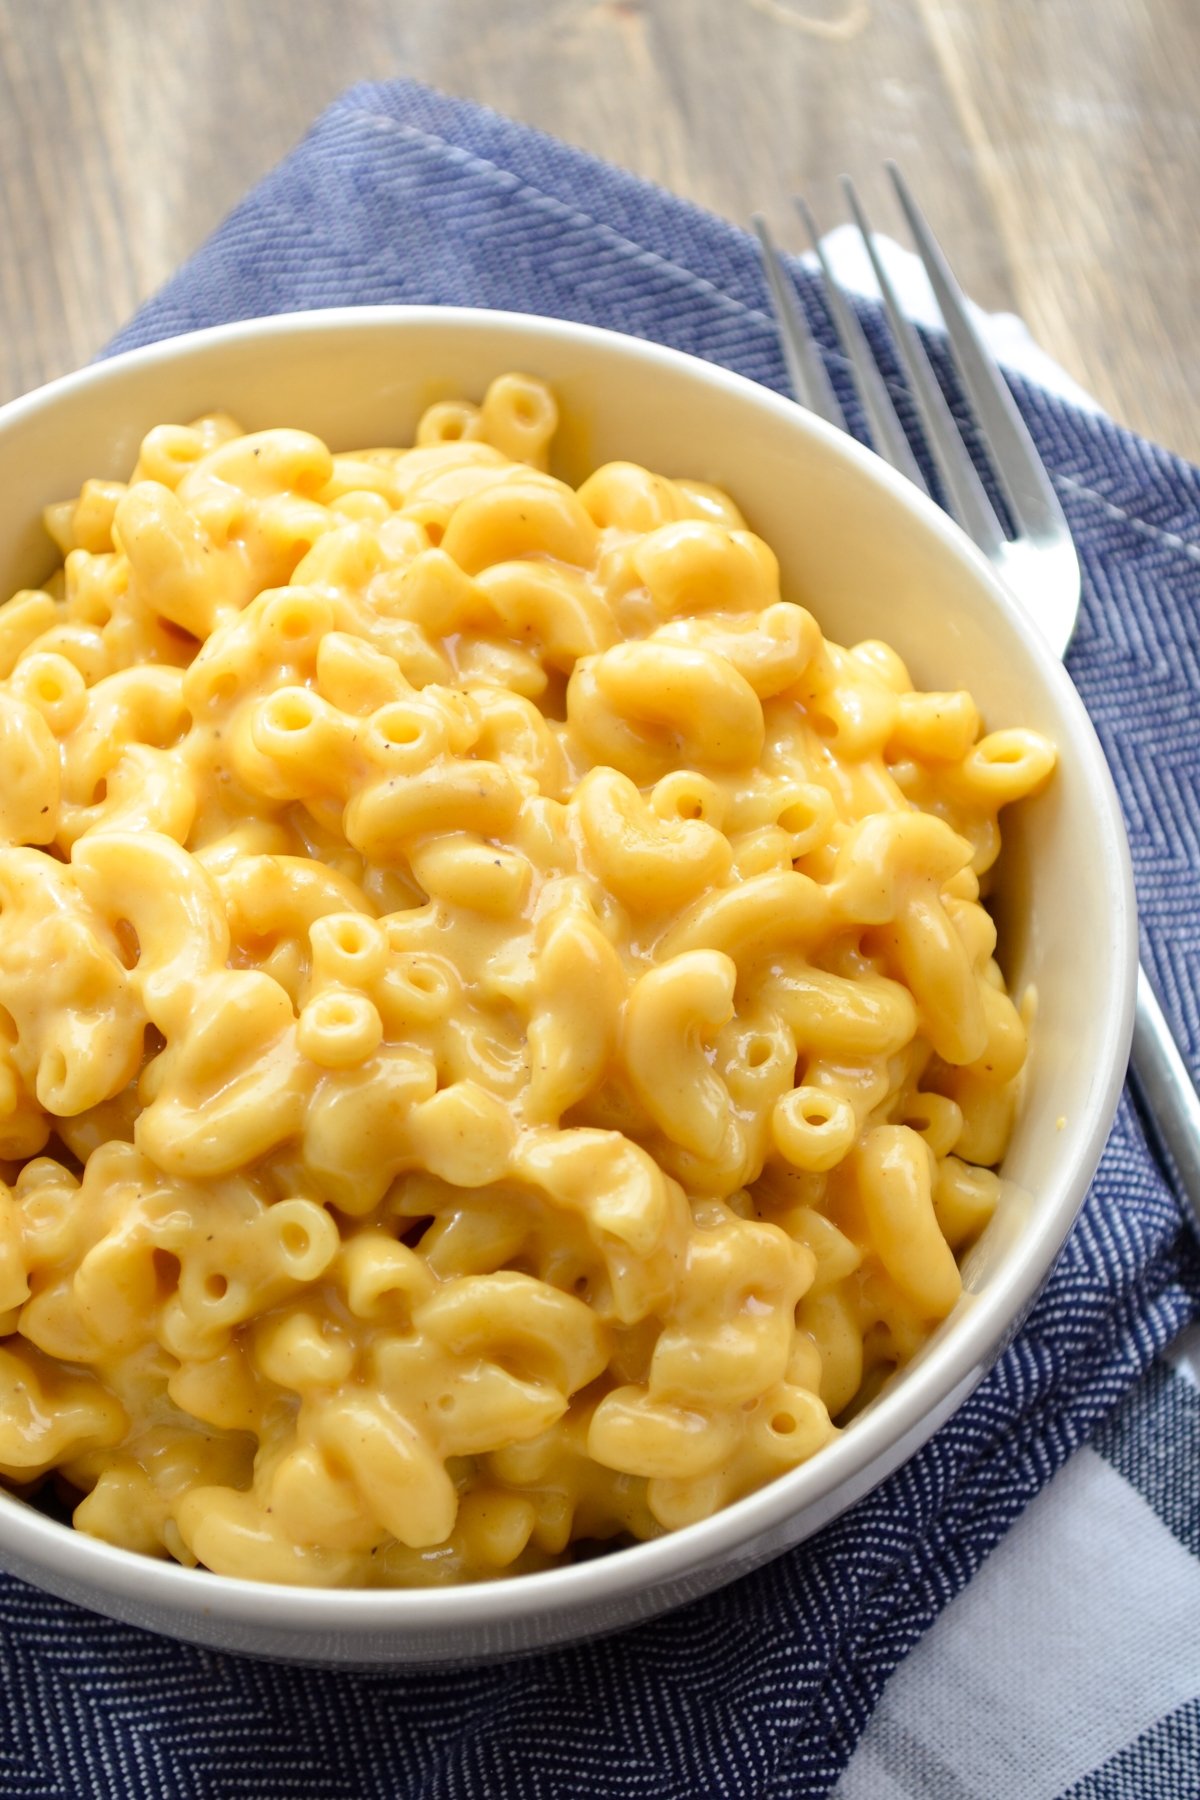 A bowl of macaroni and cheese, on a blue napkin.